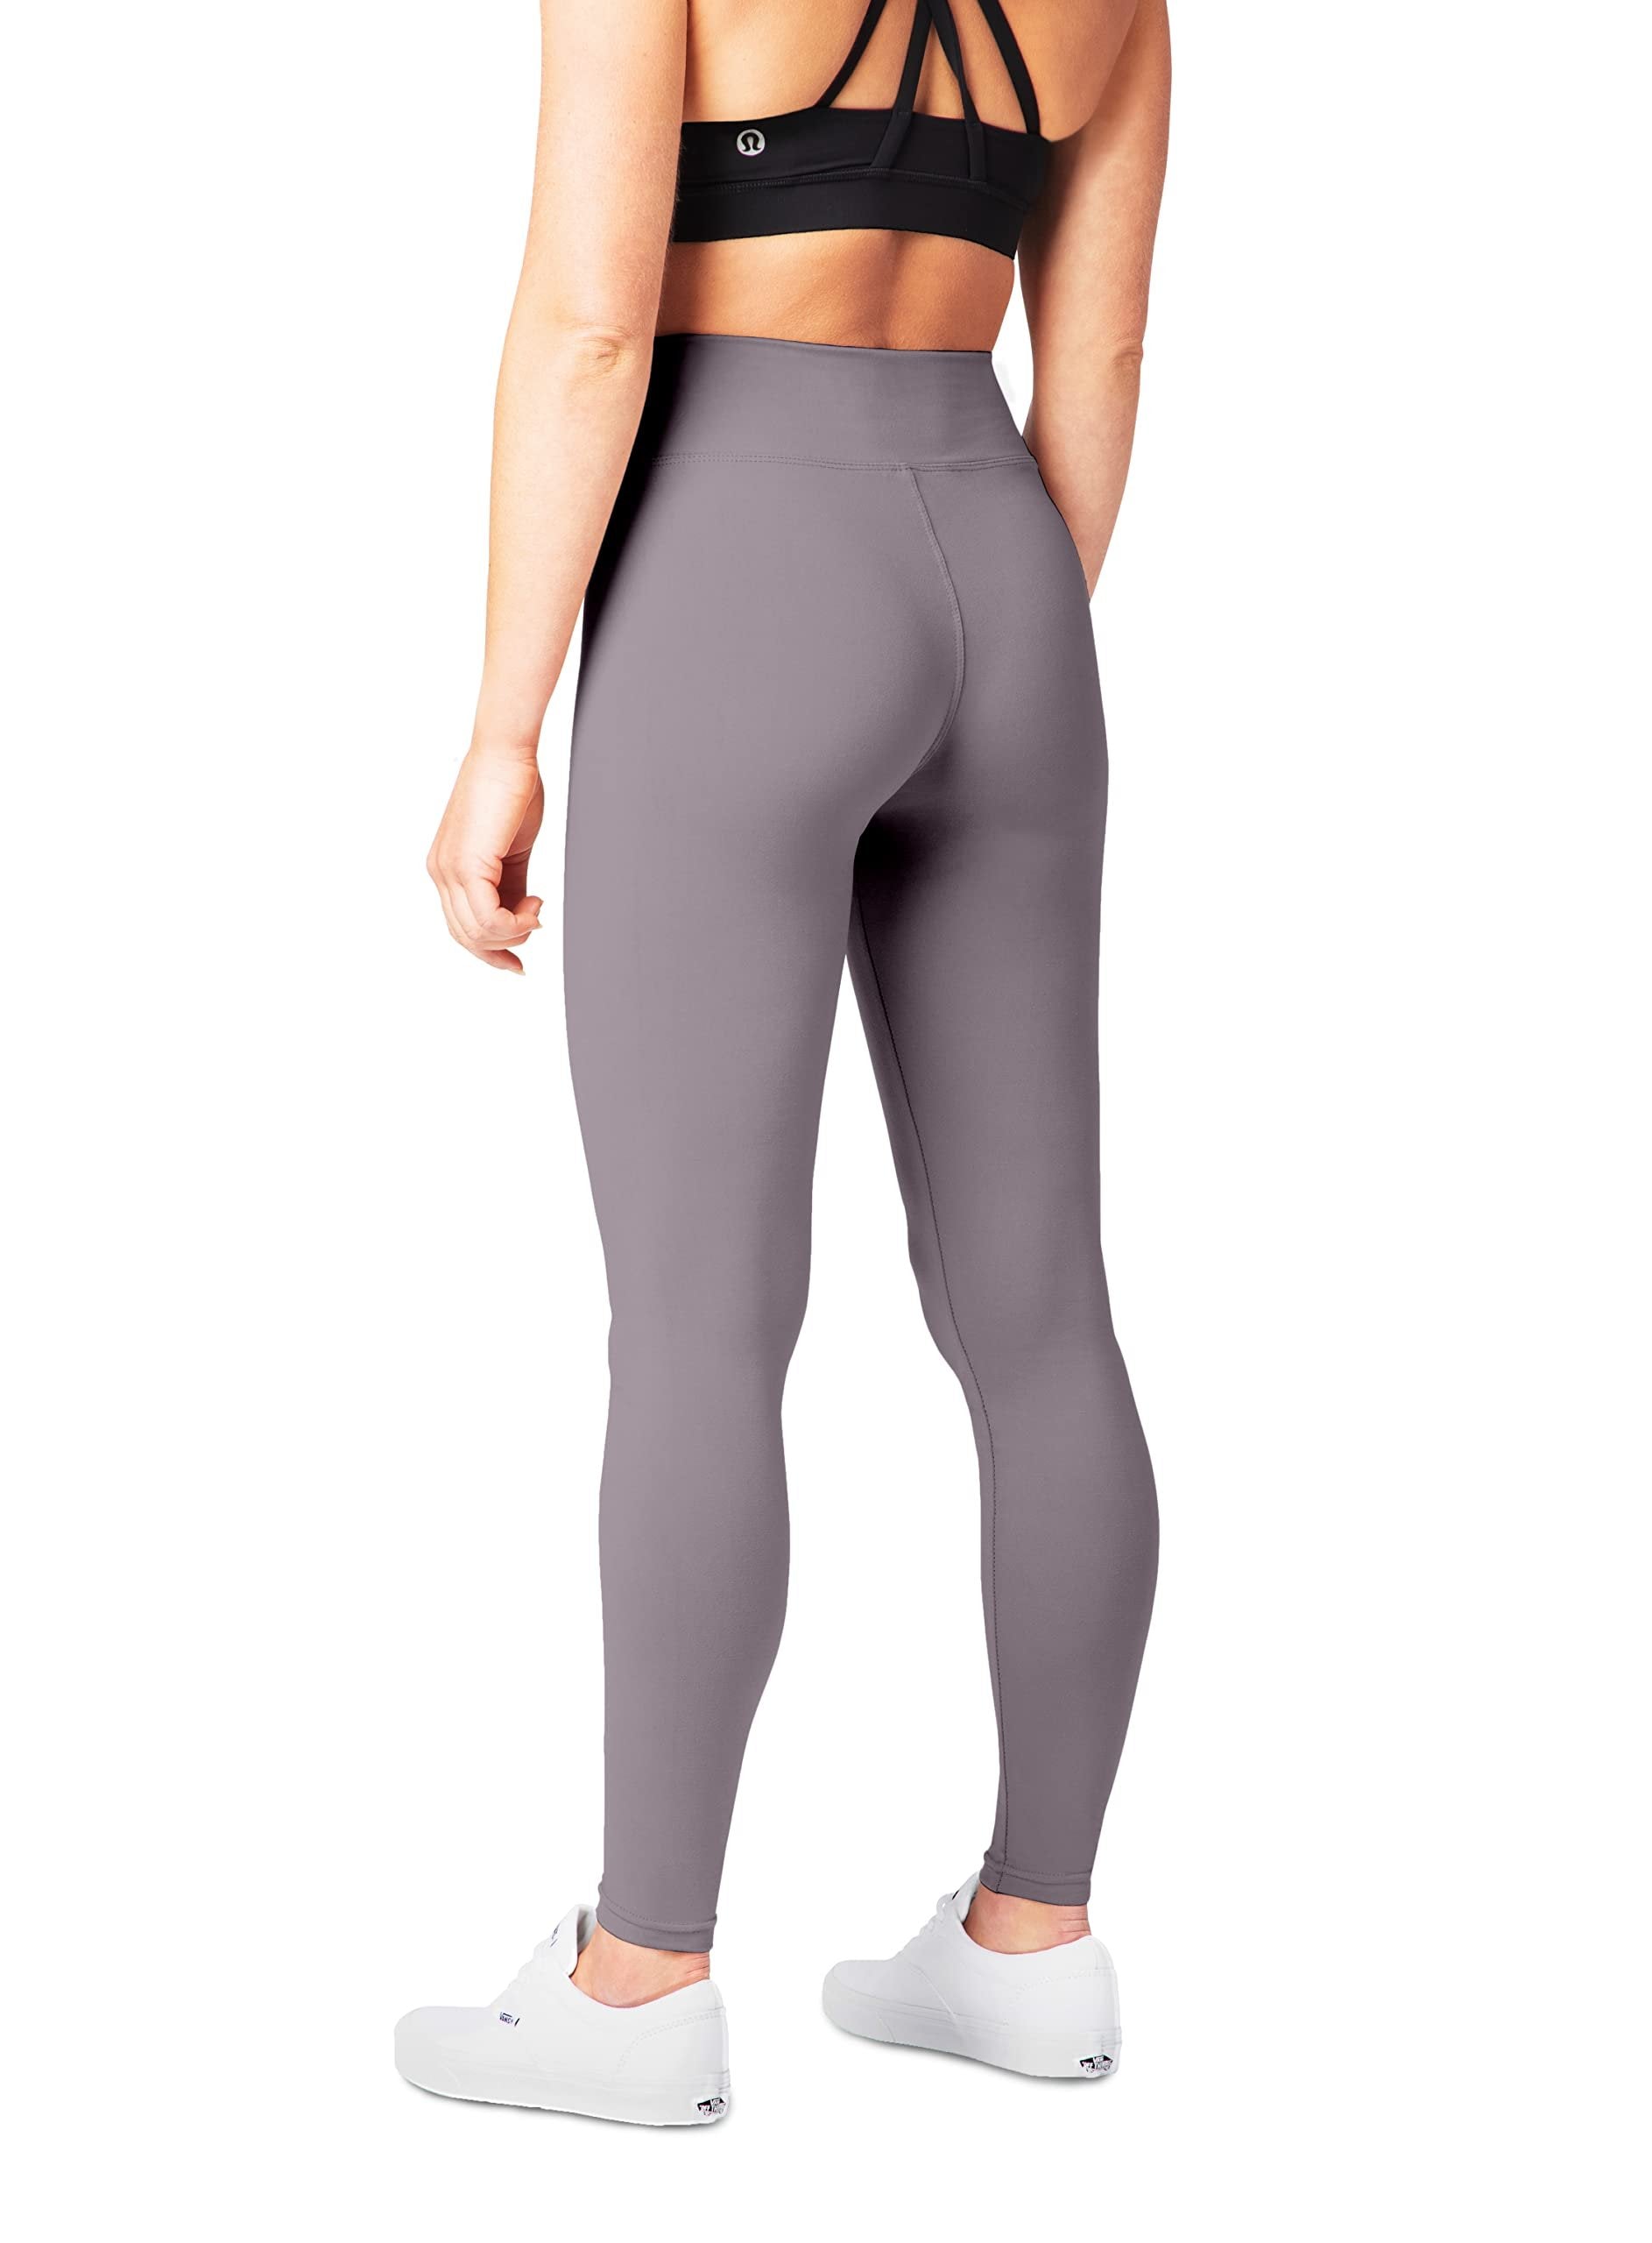 SATINA High Waisted Leggings for Women - Workout Leggings for Regular & Plus Size Women - Lilac Gray Leggings Women - Yoga Leggings for Women |3 Inch Waistband (Plus Size, Lilac Gray)